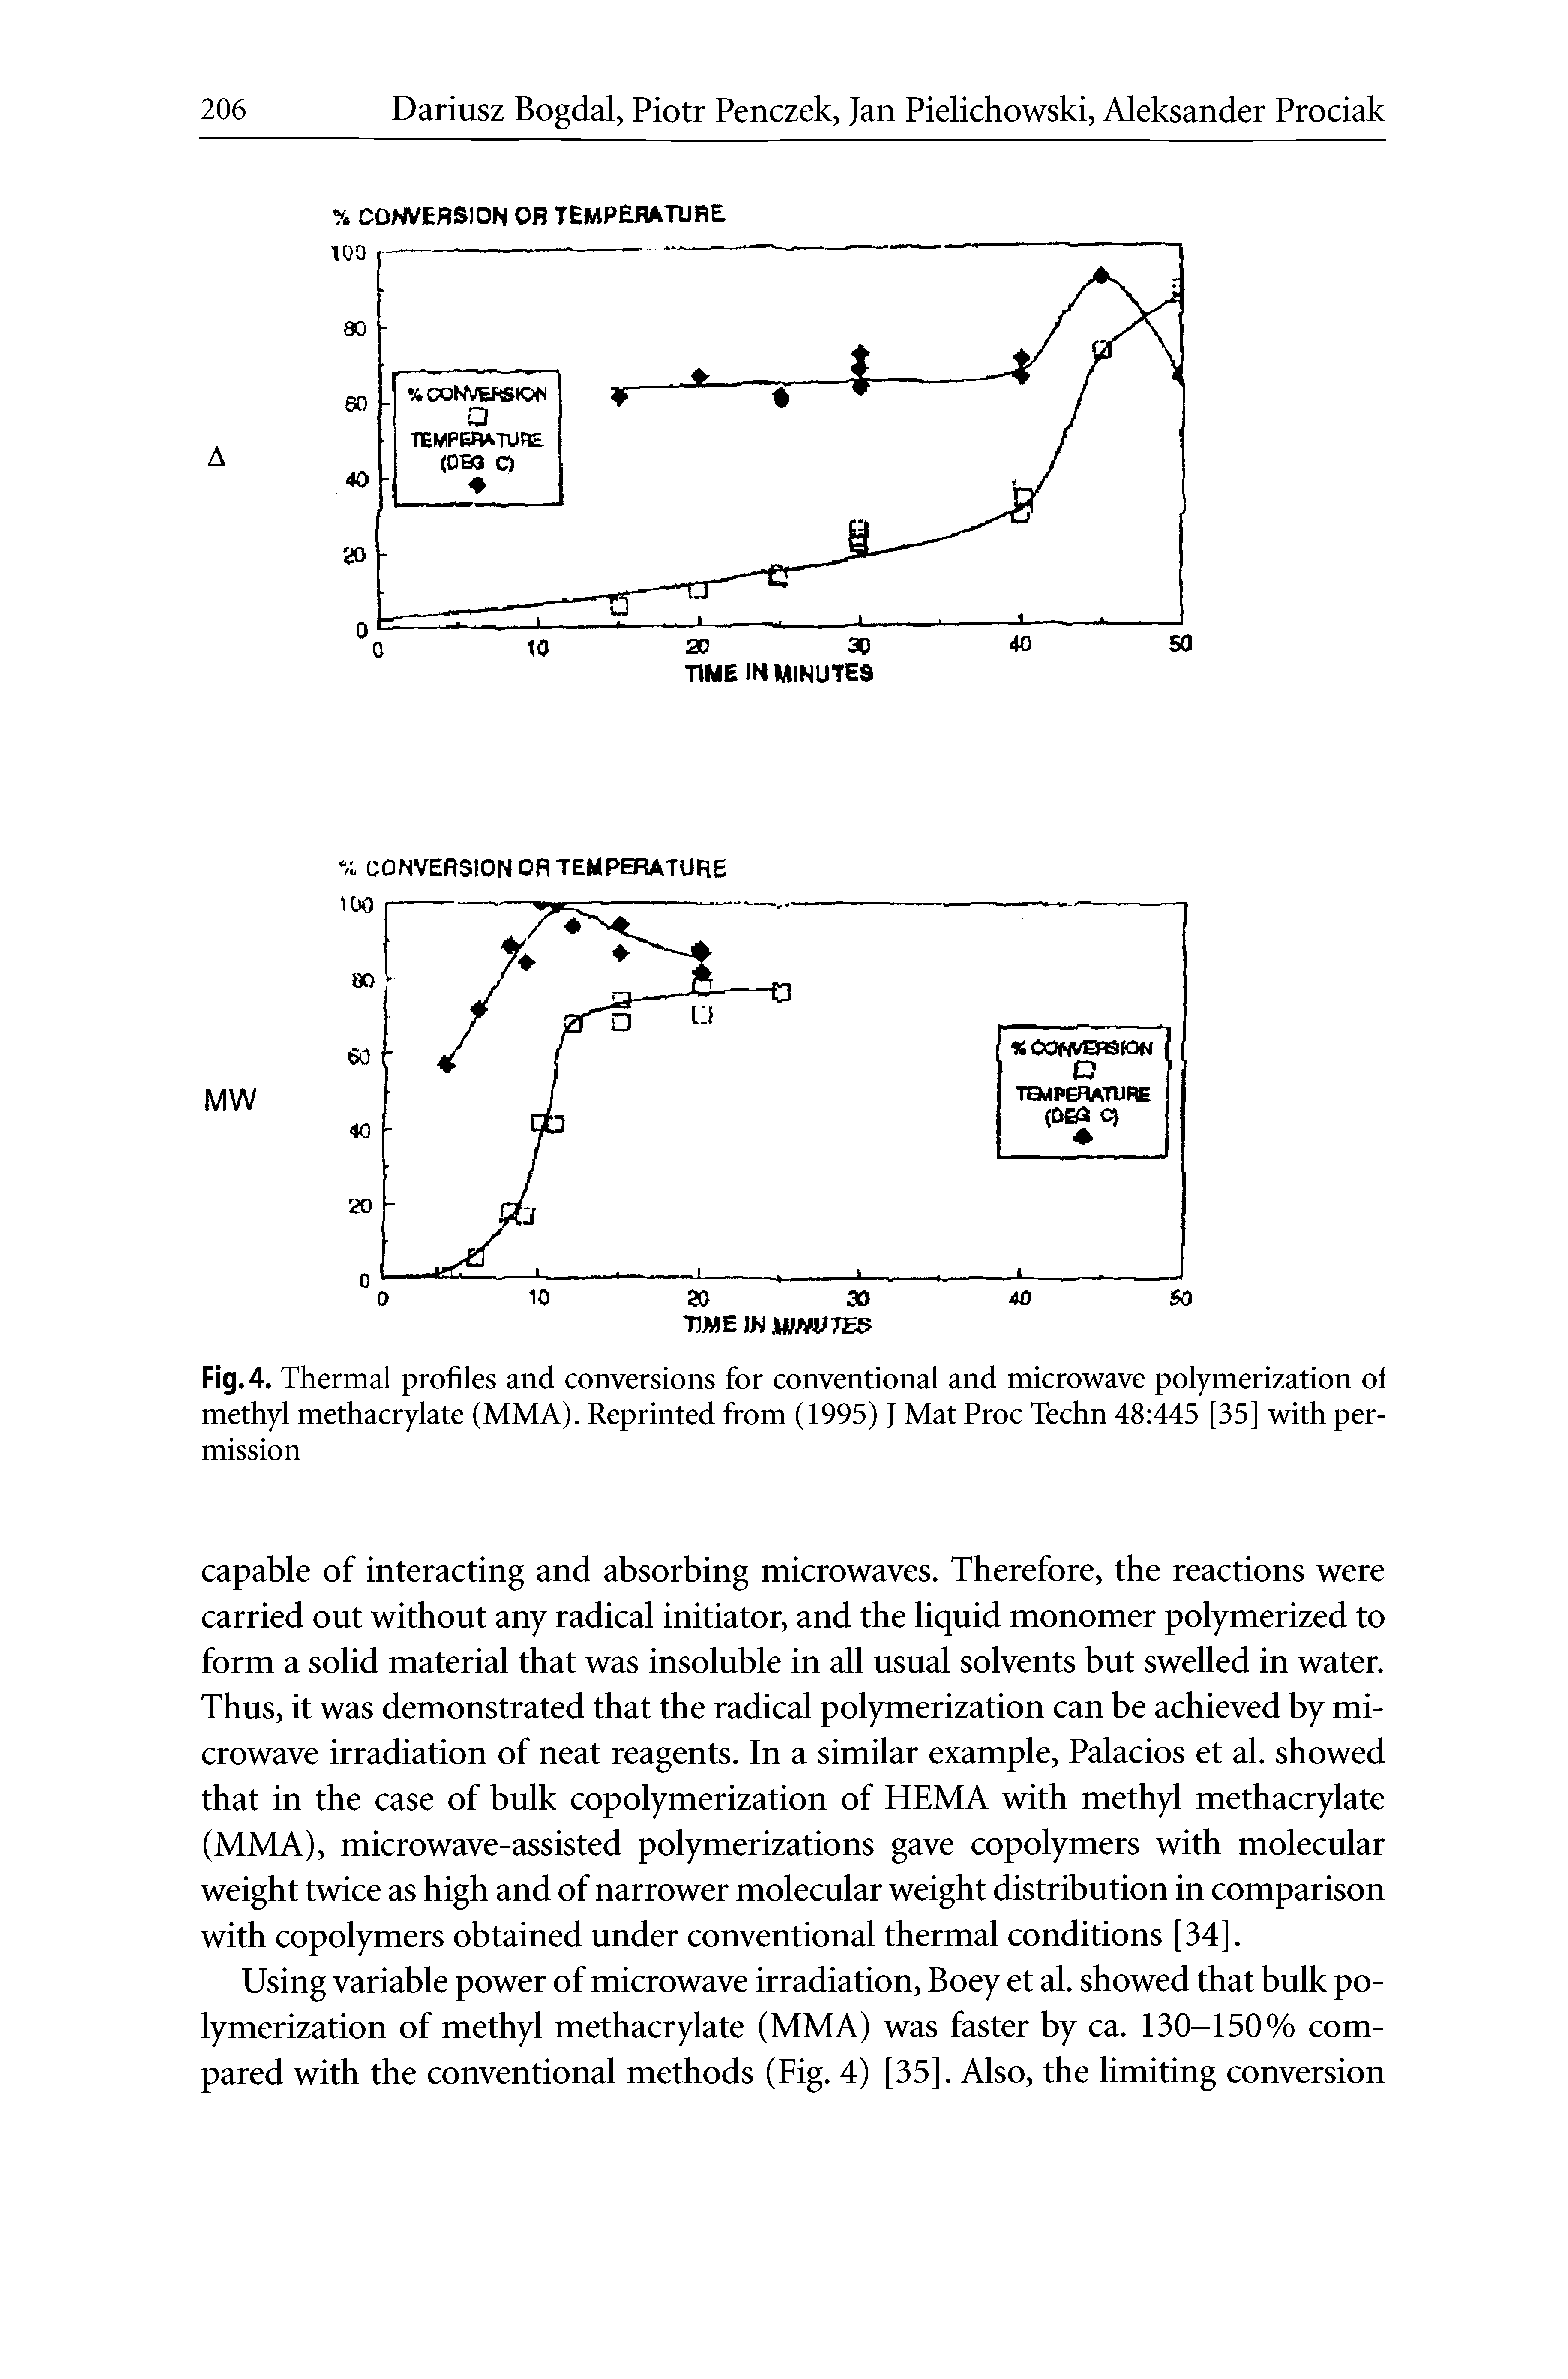 Fig. 4. Thermal profiles and conversions for conventional and microwave polymerization ol methyl methacrylate (MMA). Reprinted from (1995) J Mat Proc Techn 48 445 [35] with permission...